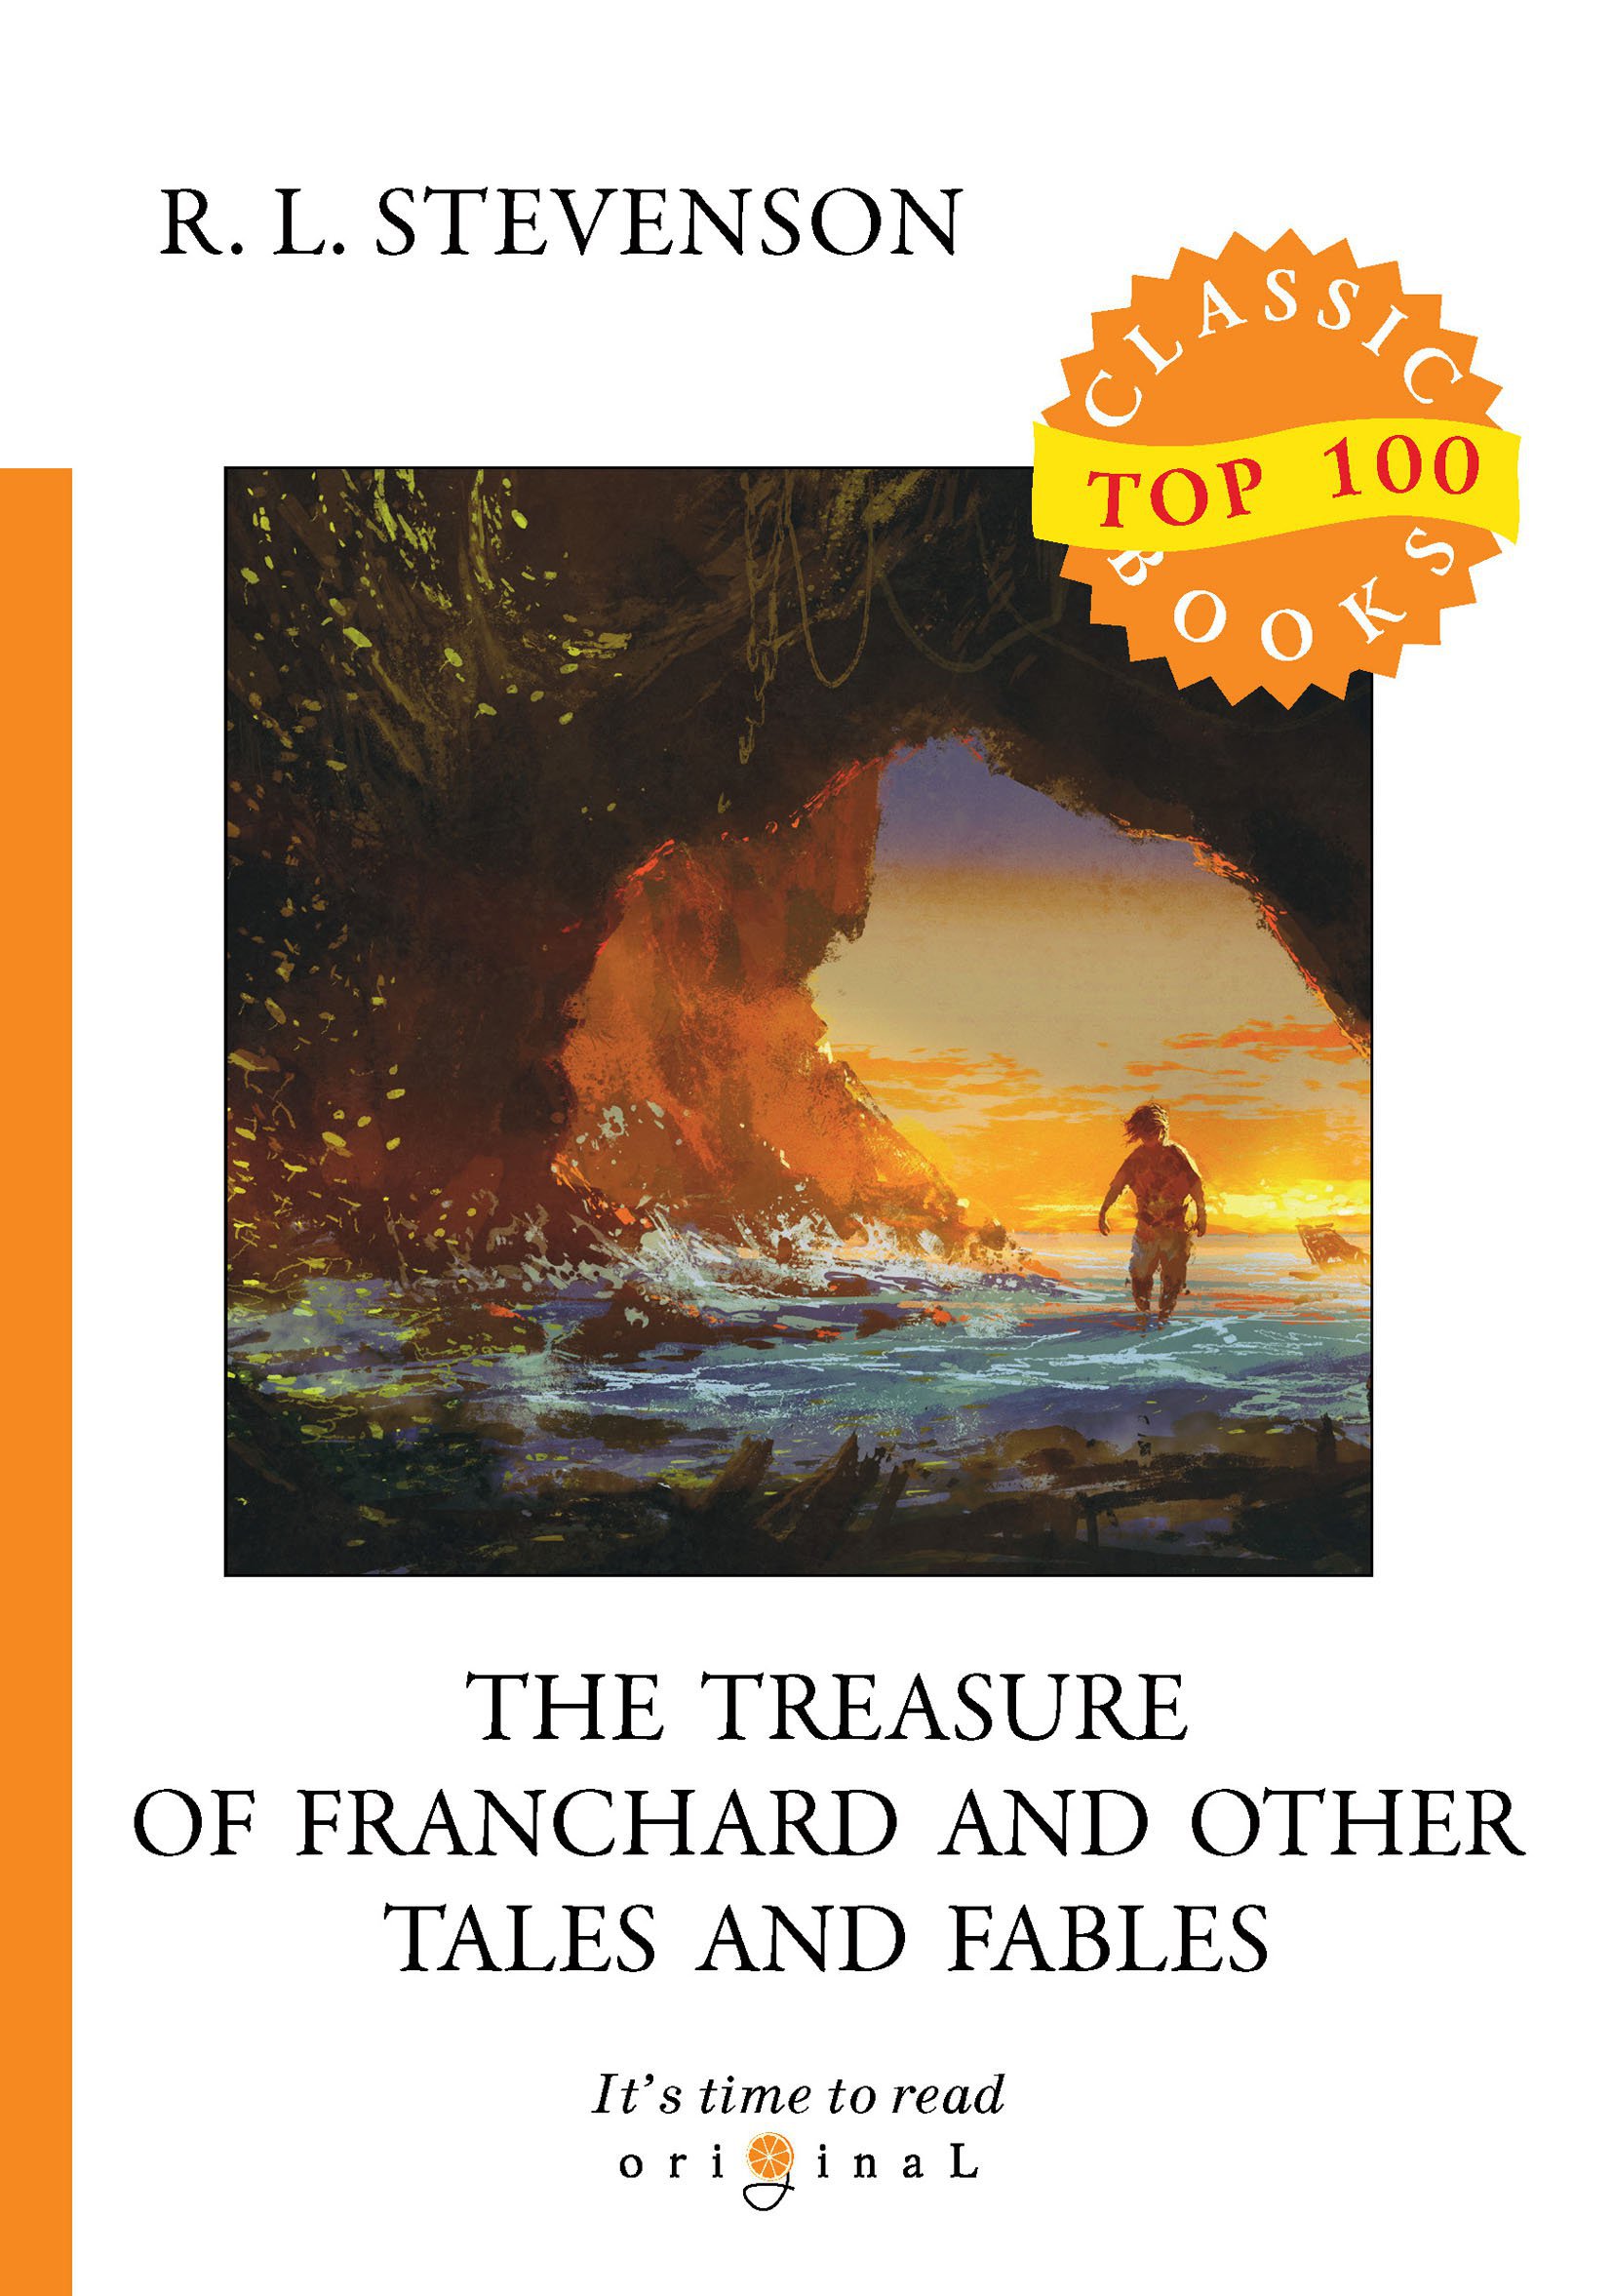 The Treasure of Franchard and Other Tales and Fables = Клад под развалинами Франшарского монастыря и другие рассказы и басни: на англ.яз